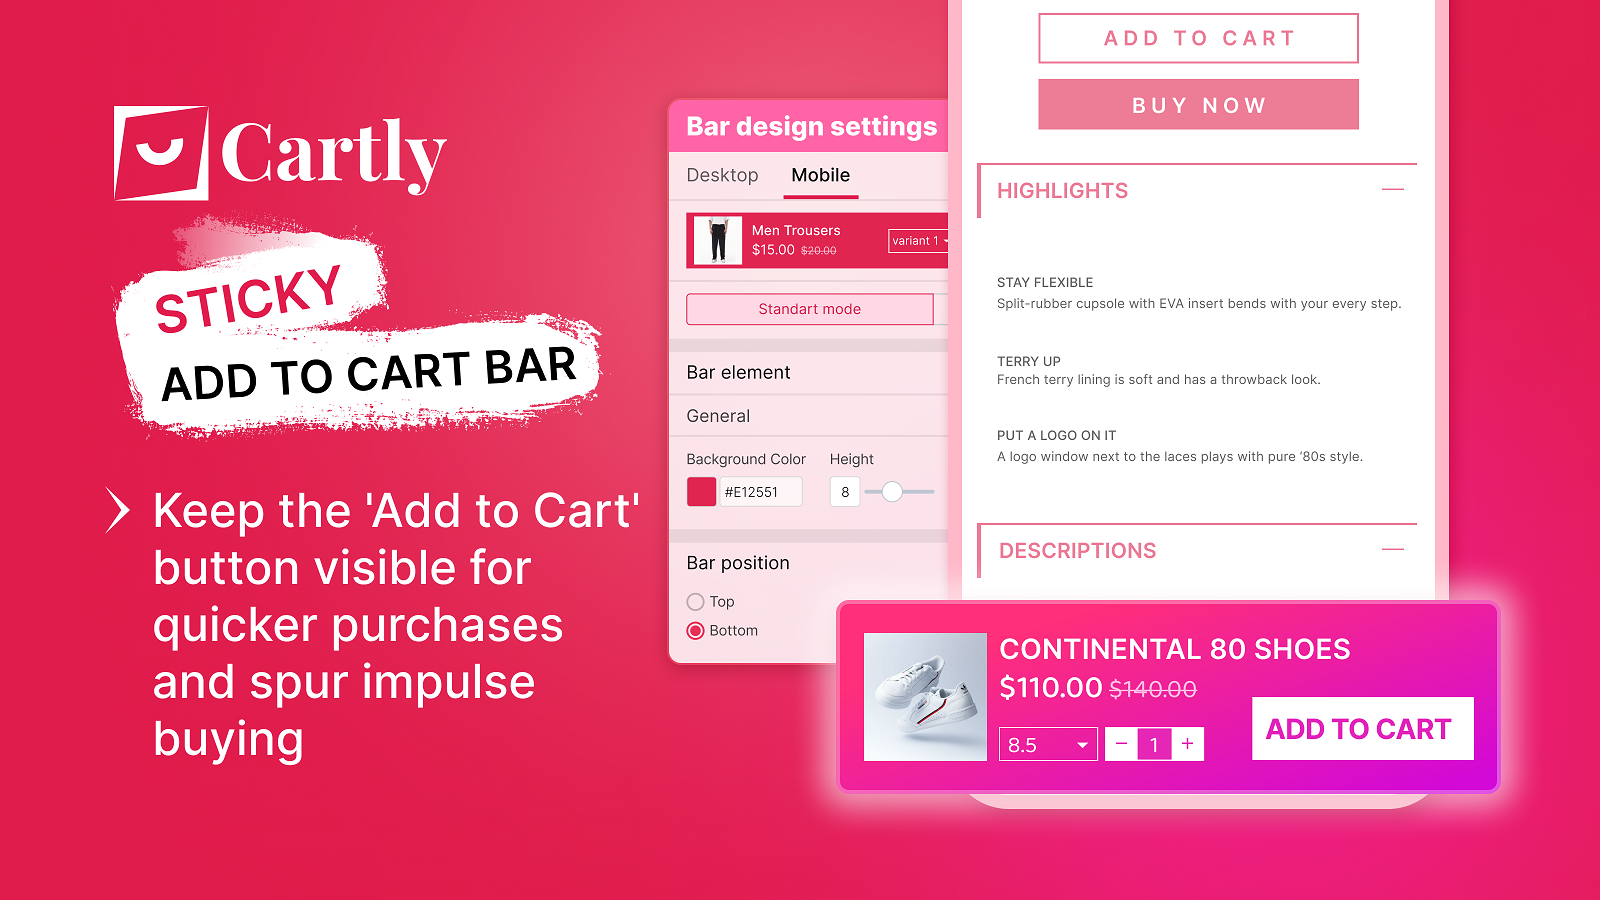 sticky add to cart button bar for quicker impulse purchases